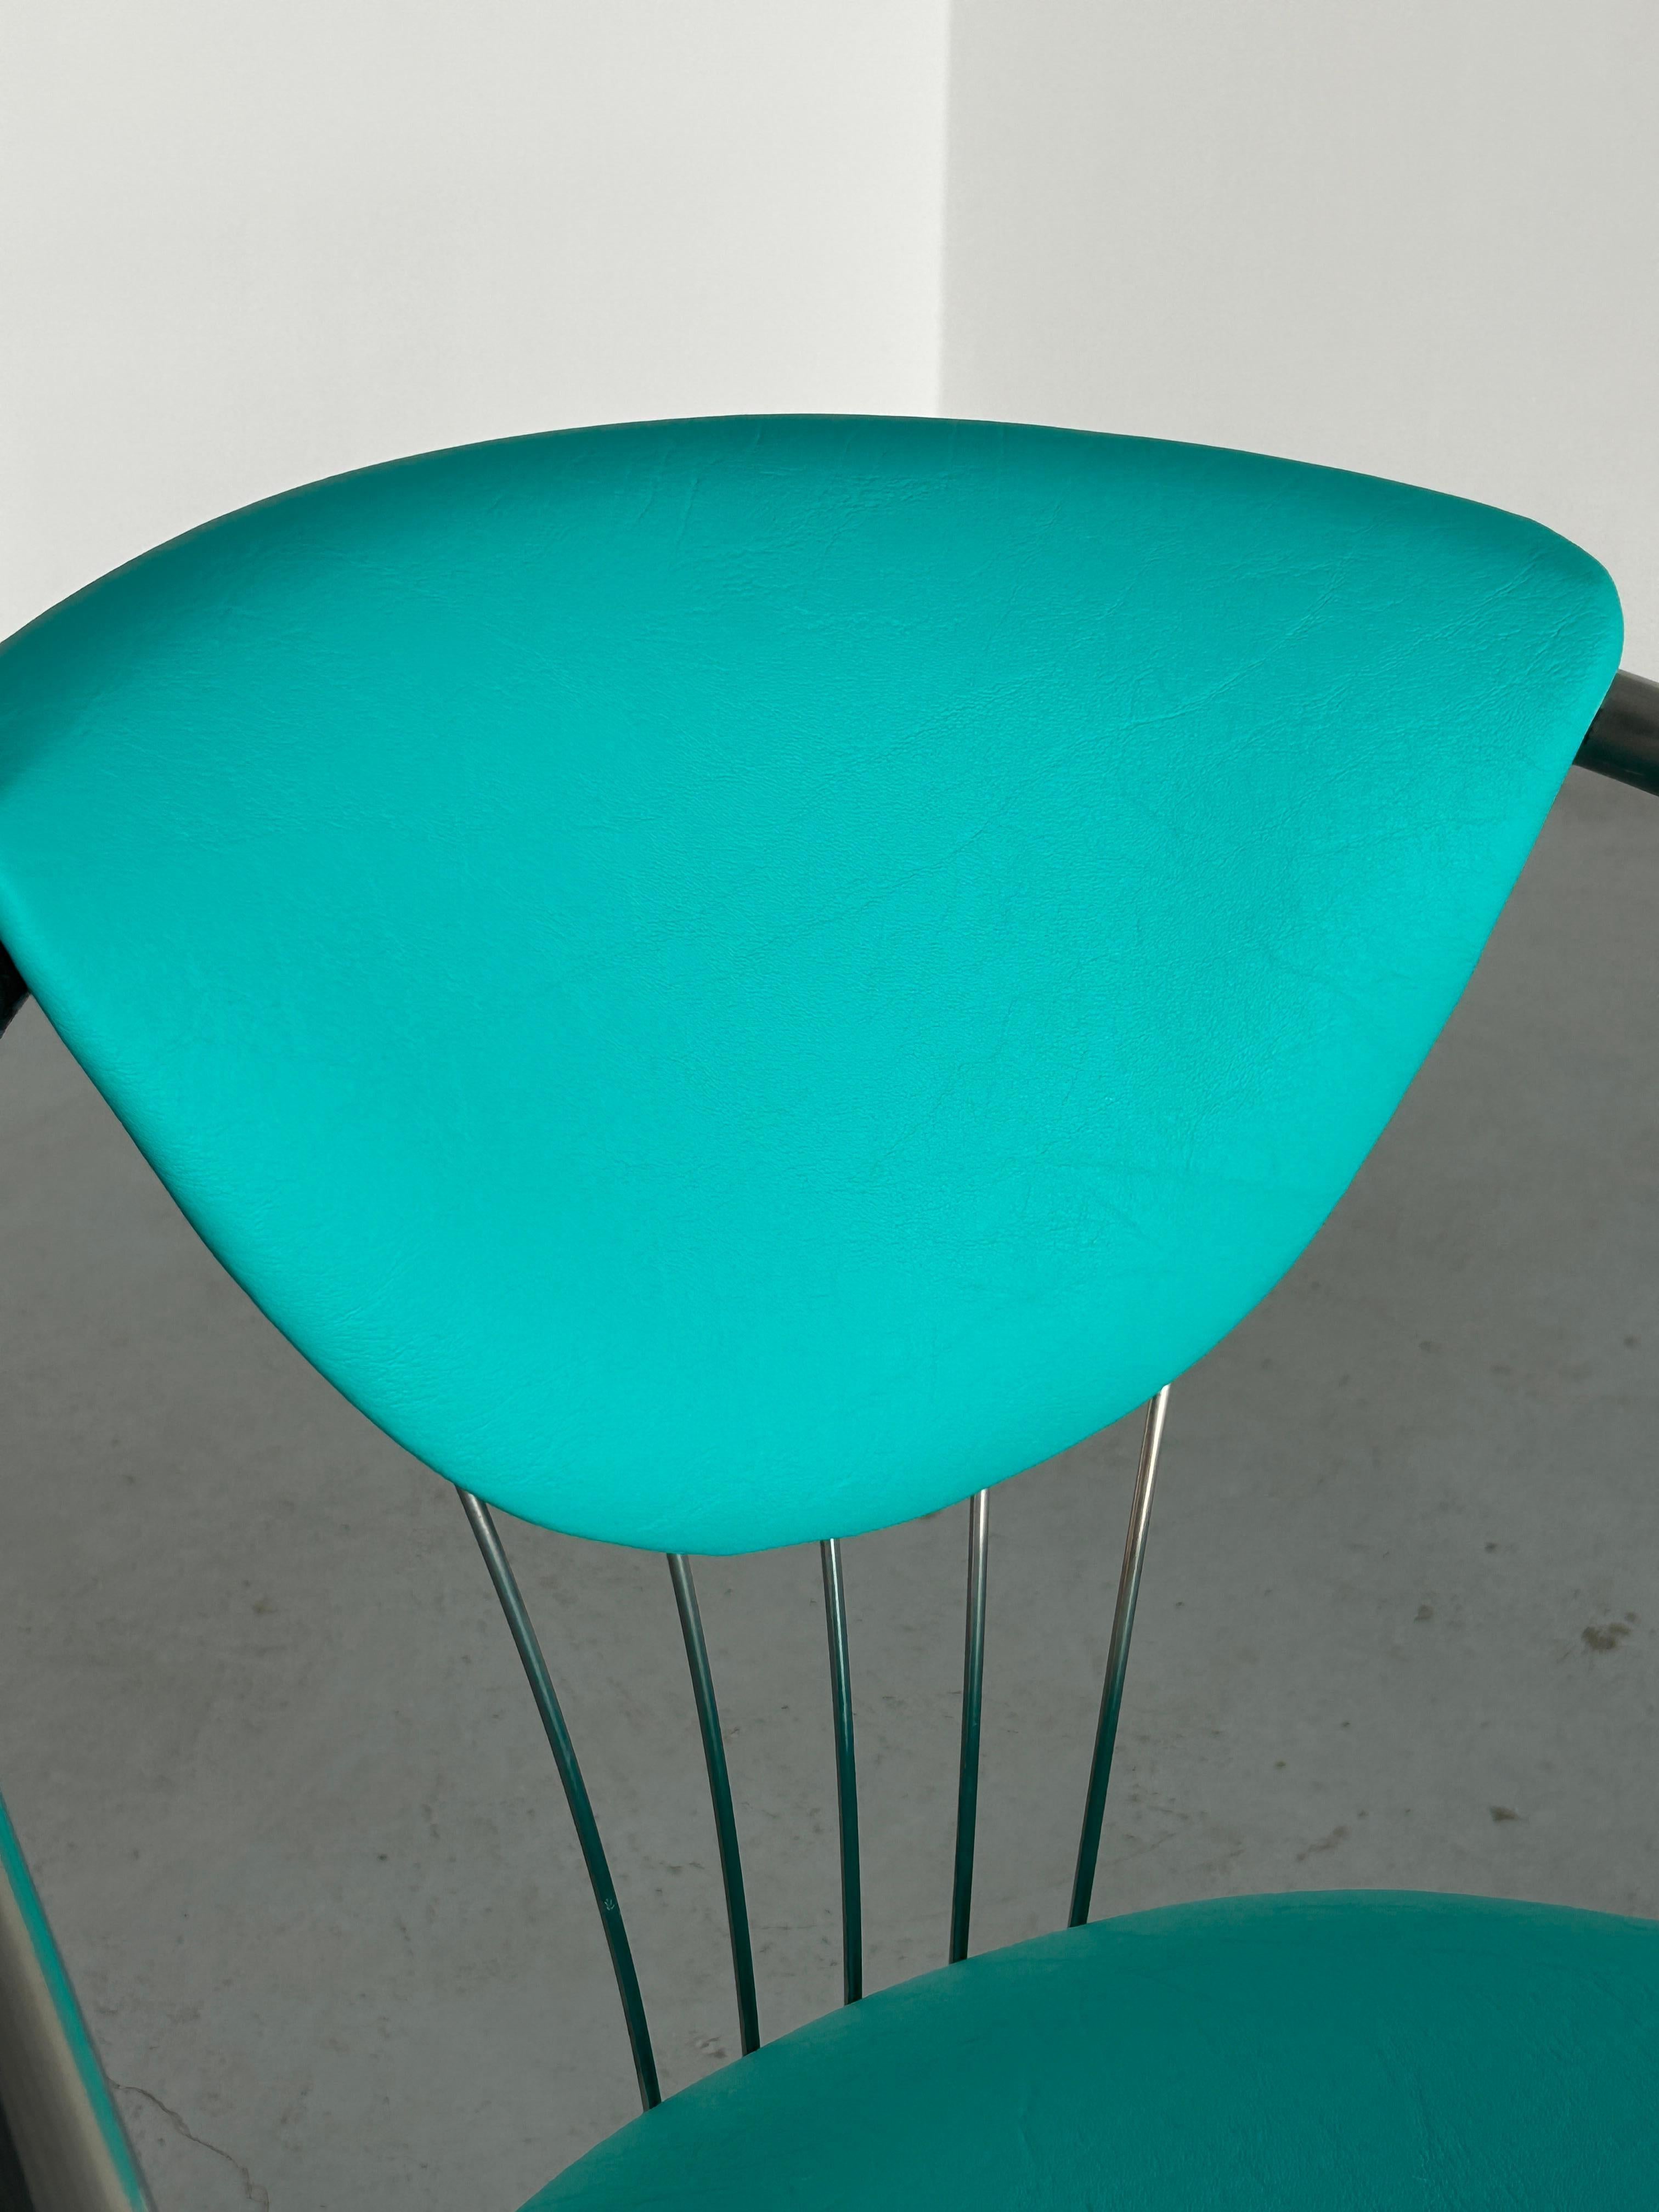 1 of 2 Vintage Steel and Mint Green Faux Leather Dining Chairs by Effezeta, 90s For Sale 5